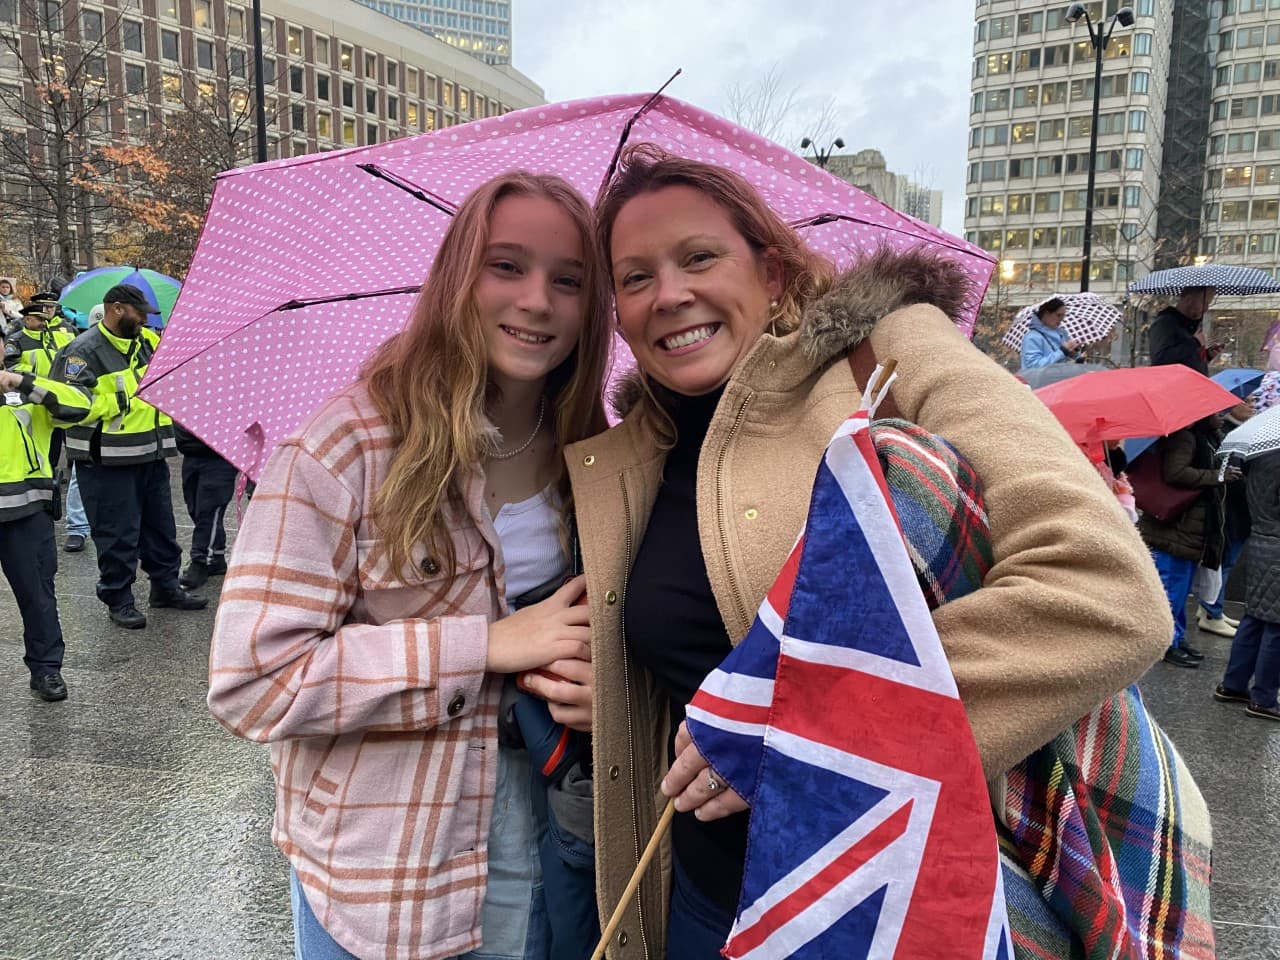 Susannah Copland, right, with her 11-year-old daughter Annabel Copland at City Hall Plaza in Boston for an event welcoming the Prince and Princess of Wales on Nov. 30. (Vanessa Ochavillo/WBUR)